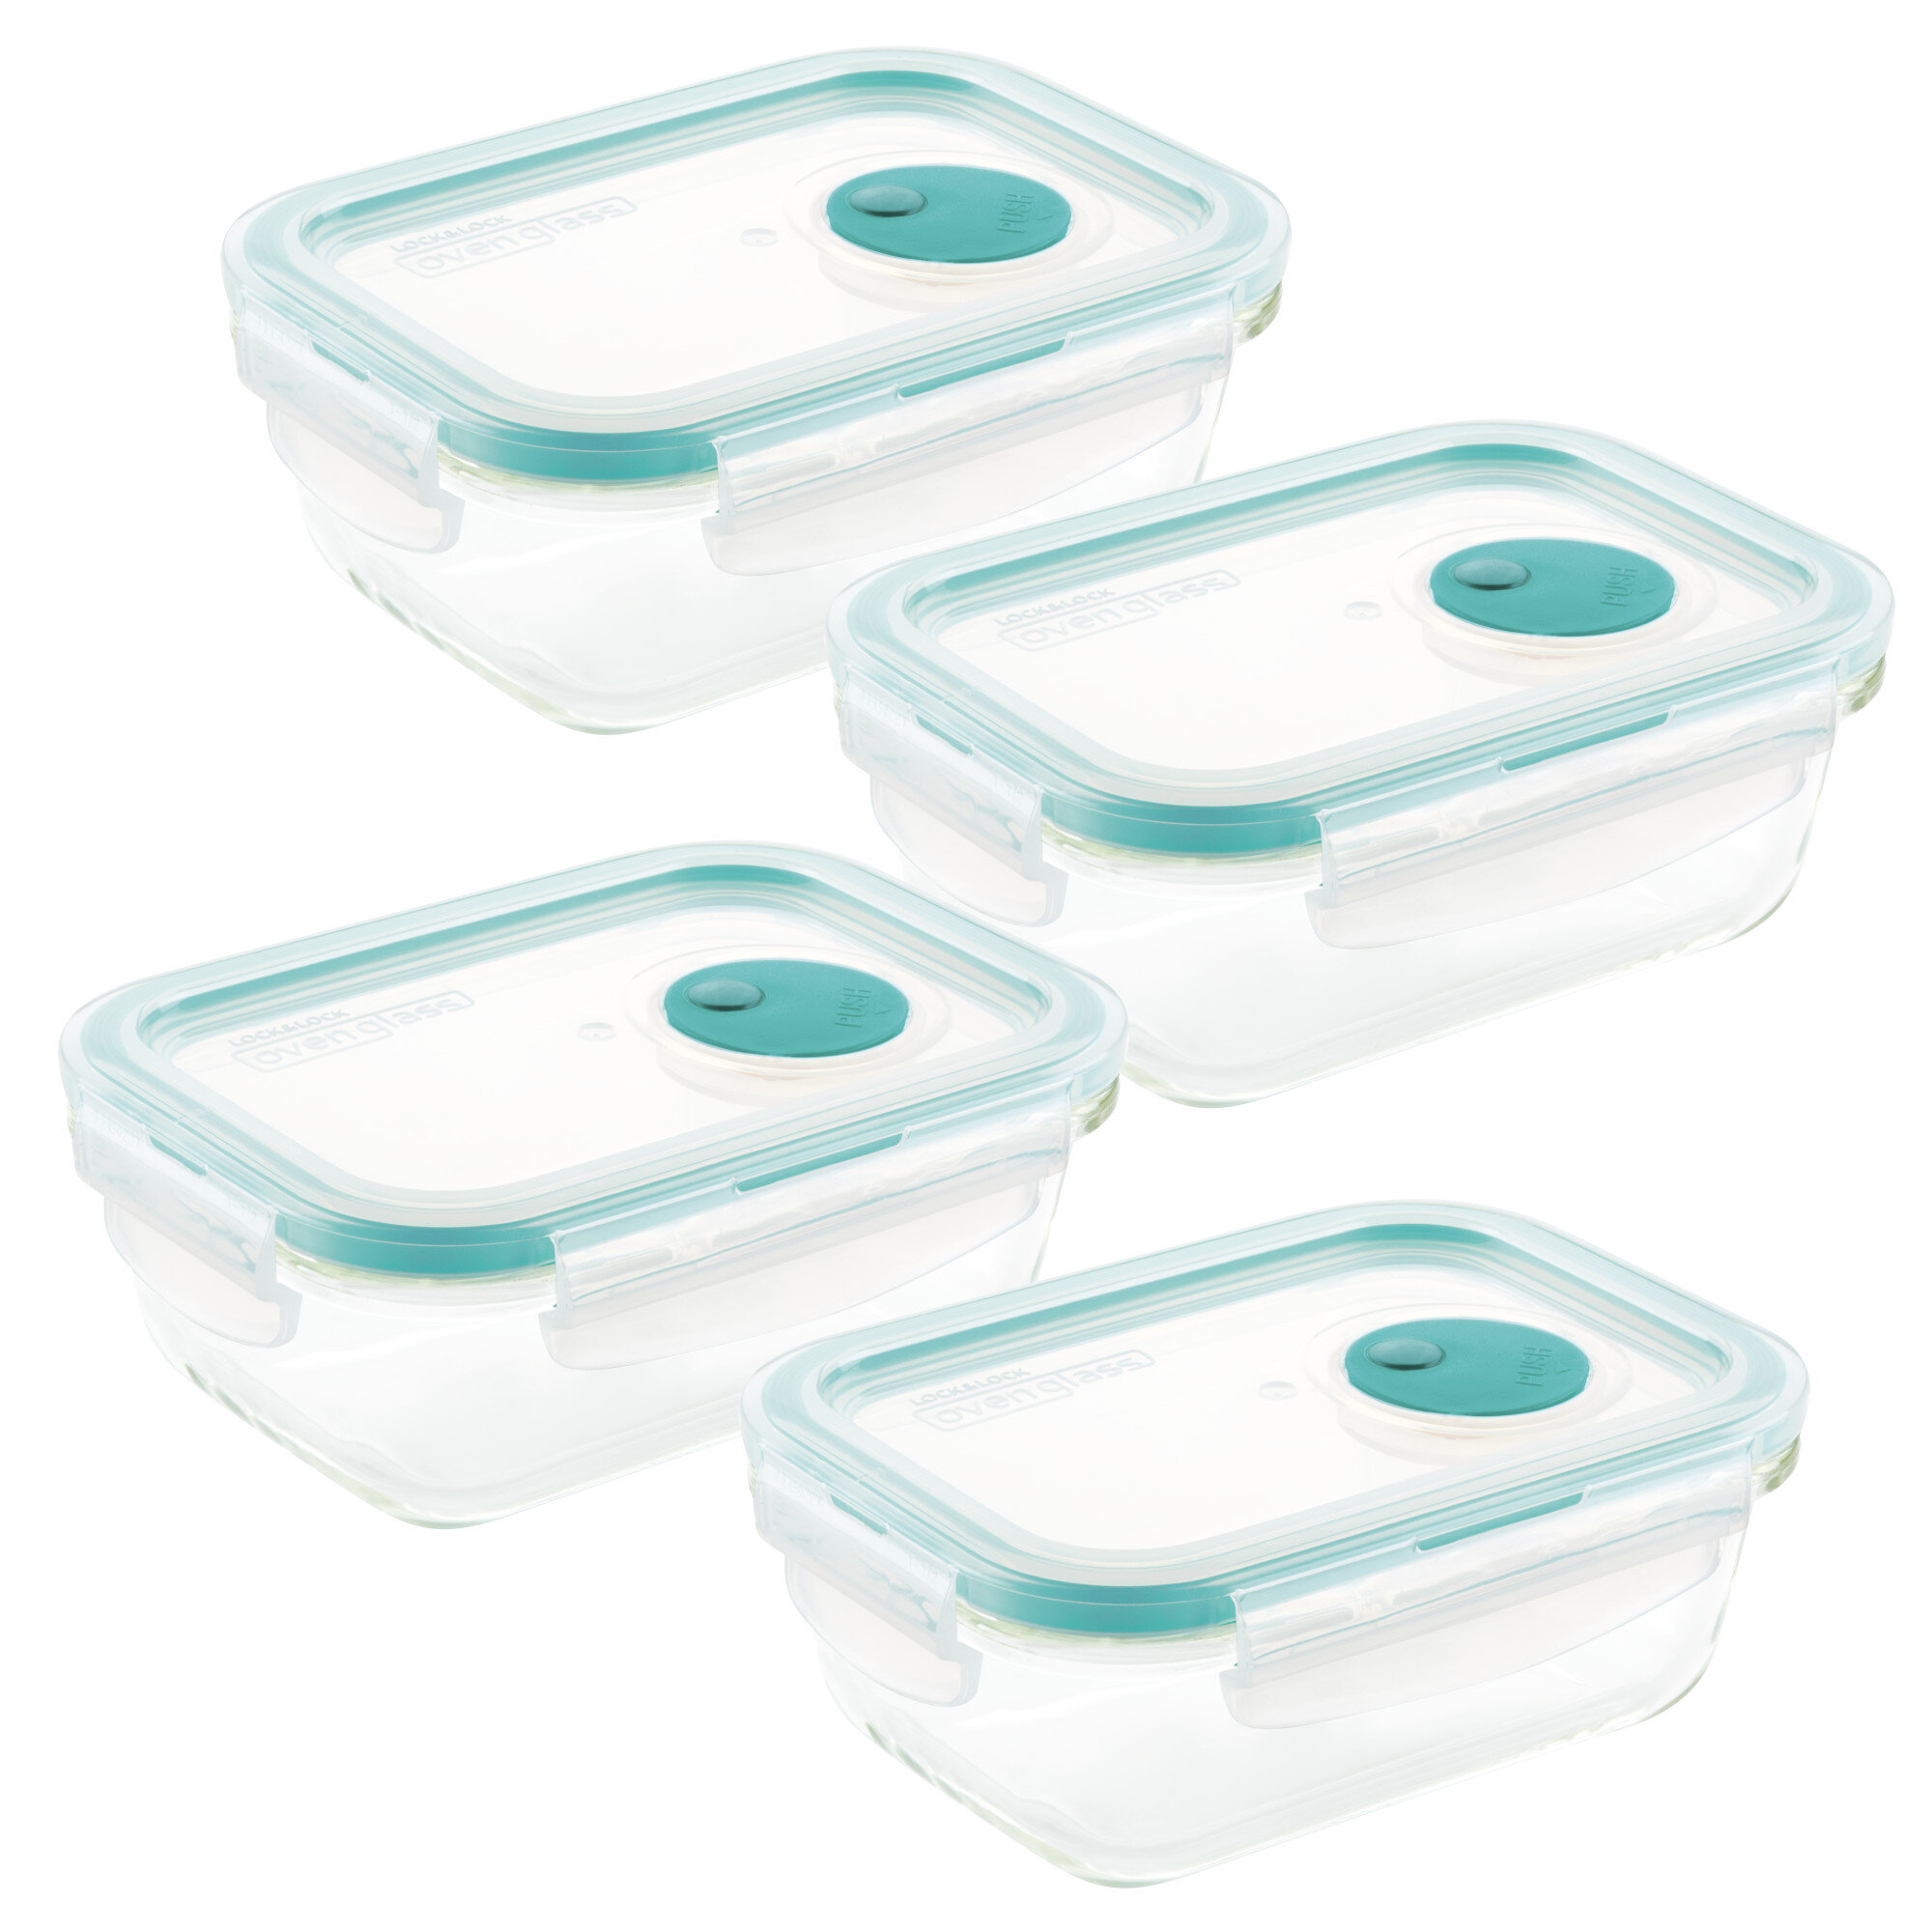 NutriChef 24 pc. Stackable Borosilicate Glass Food Storage